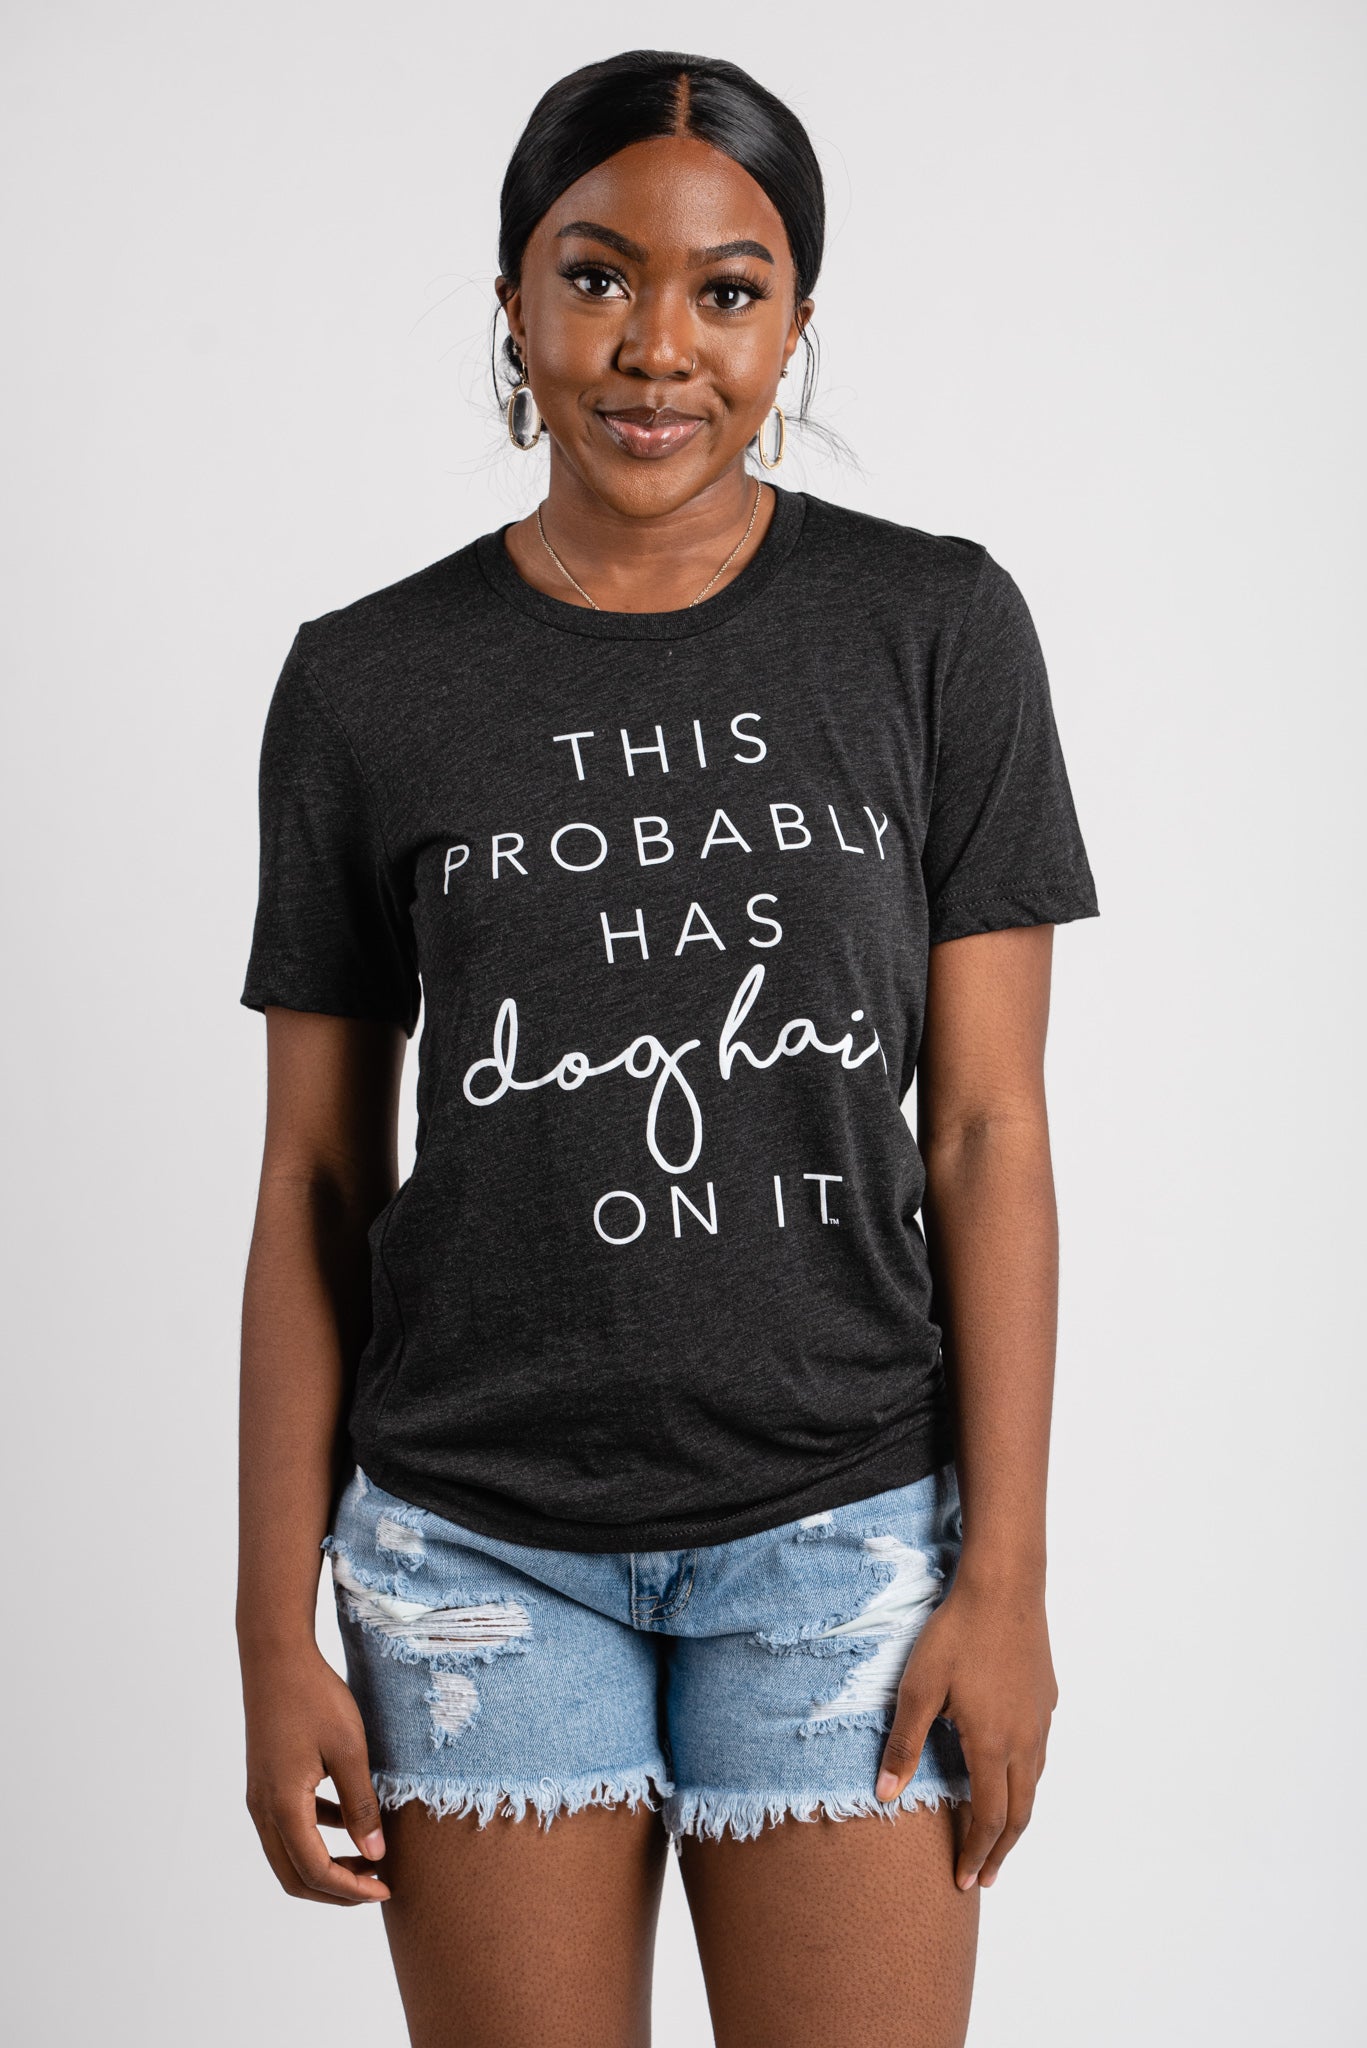 This probably has dog hair on it unisex short sleeve t-shirt charcoal - Cute T-shirts - Funny T-Shirts at Lush Fashion Lounge Boutique in Oklahoma City